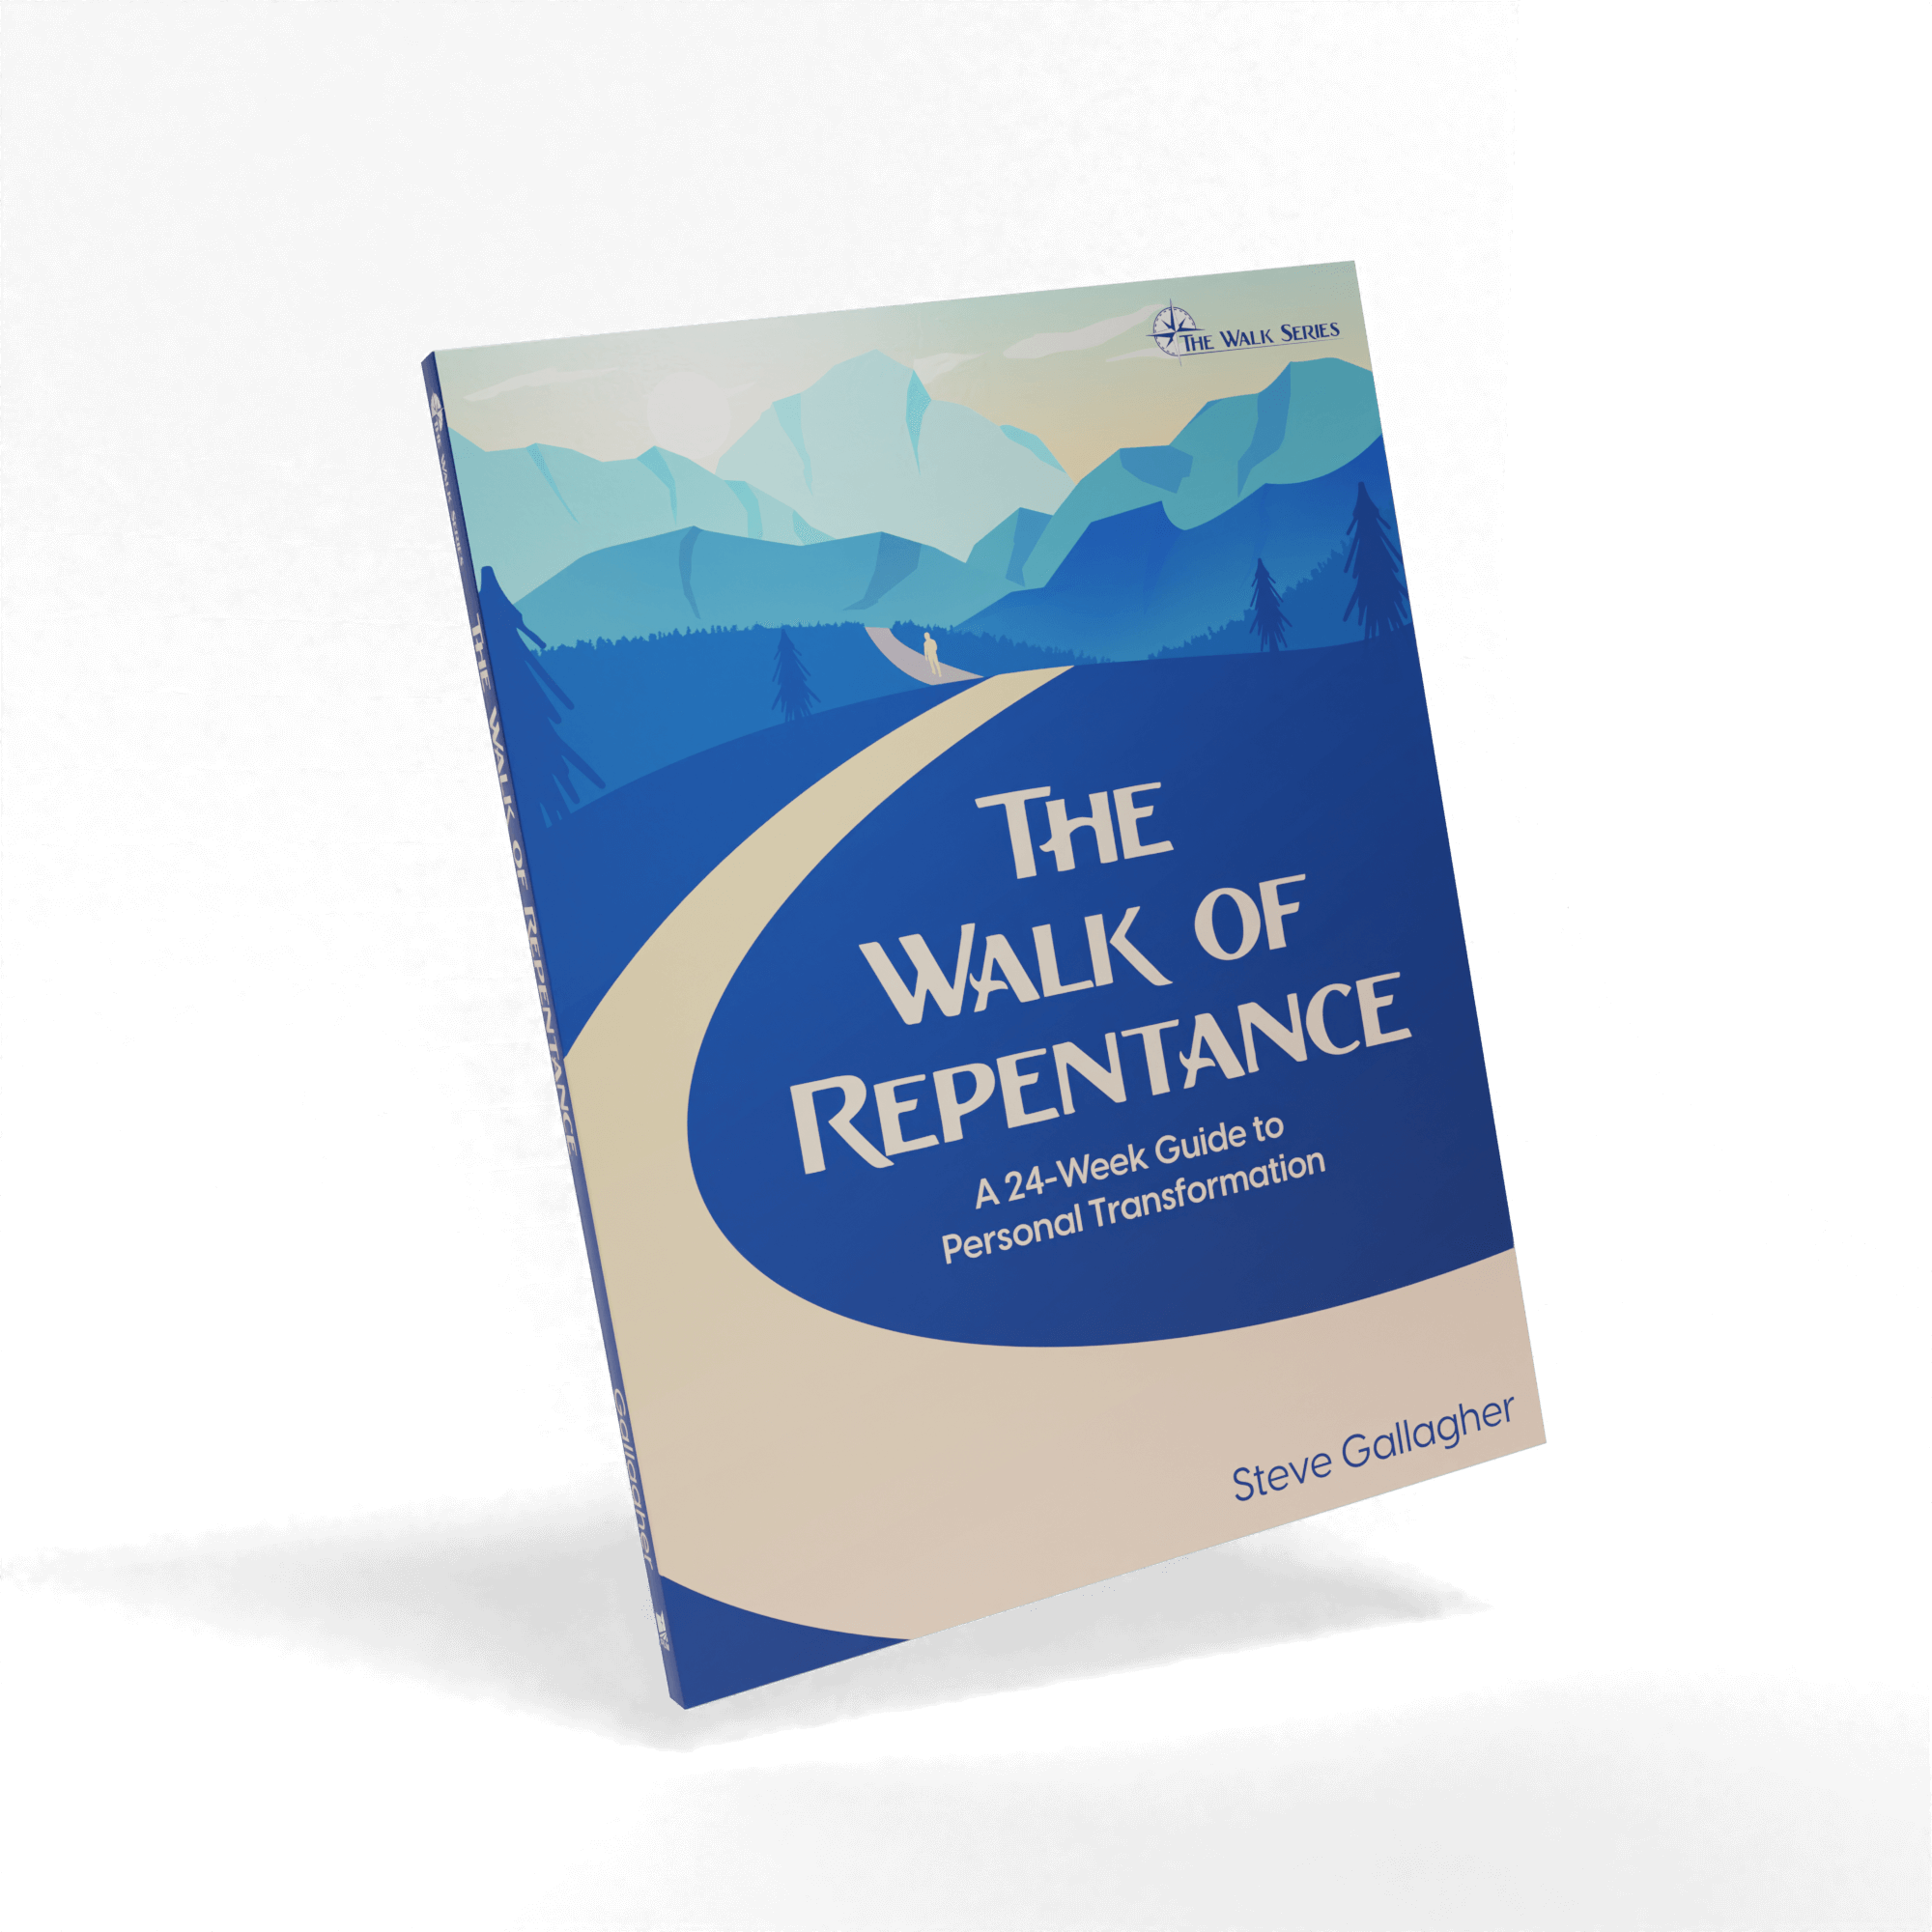 The walk of Repentance: A 24-week Guide to Personal Transformation Bible Study Book by Steve Gallagher